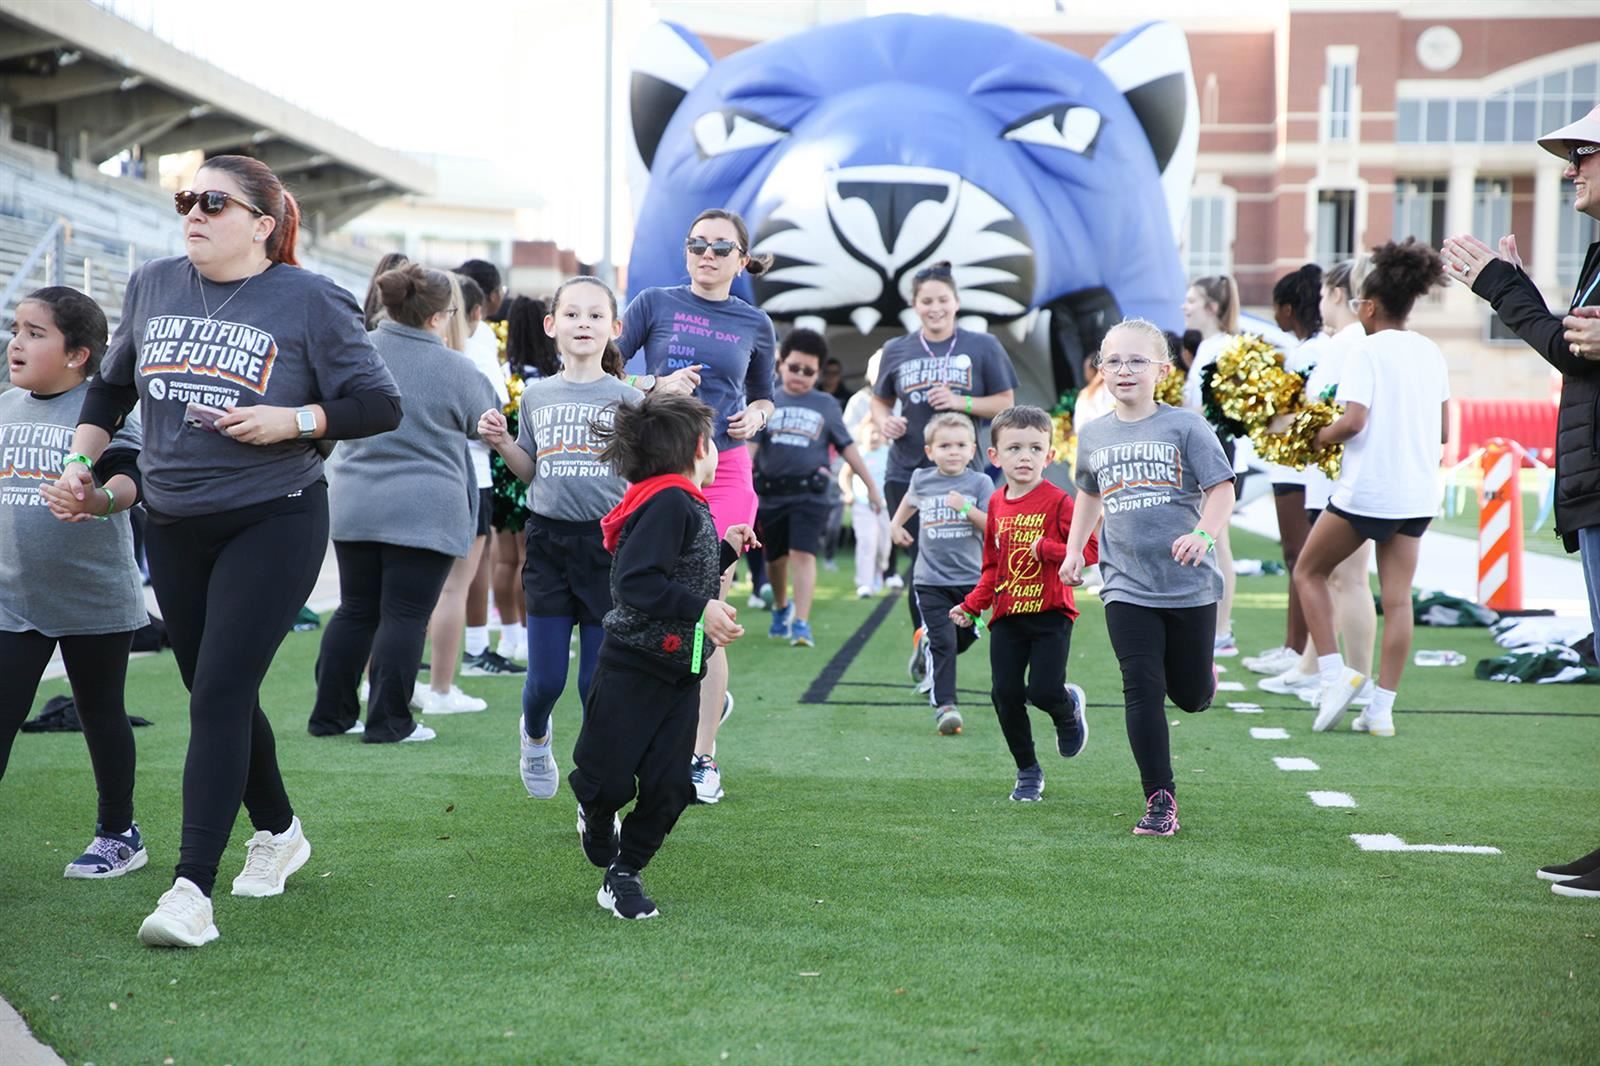 In addition to a 5K run, the Superintendent’s Fun Run features a 1-mile family-friendly walk/run.